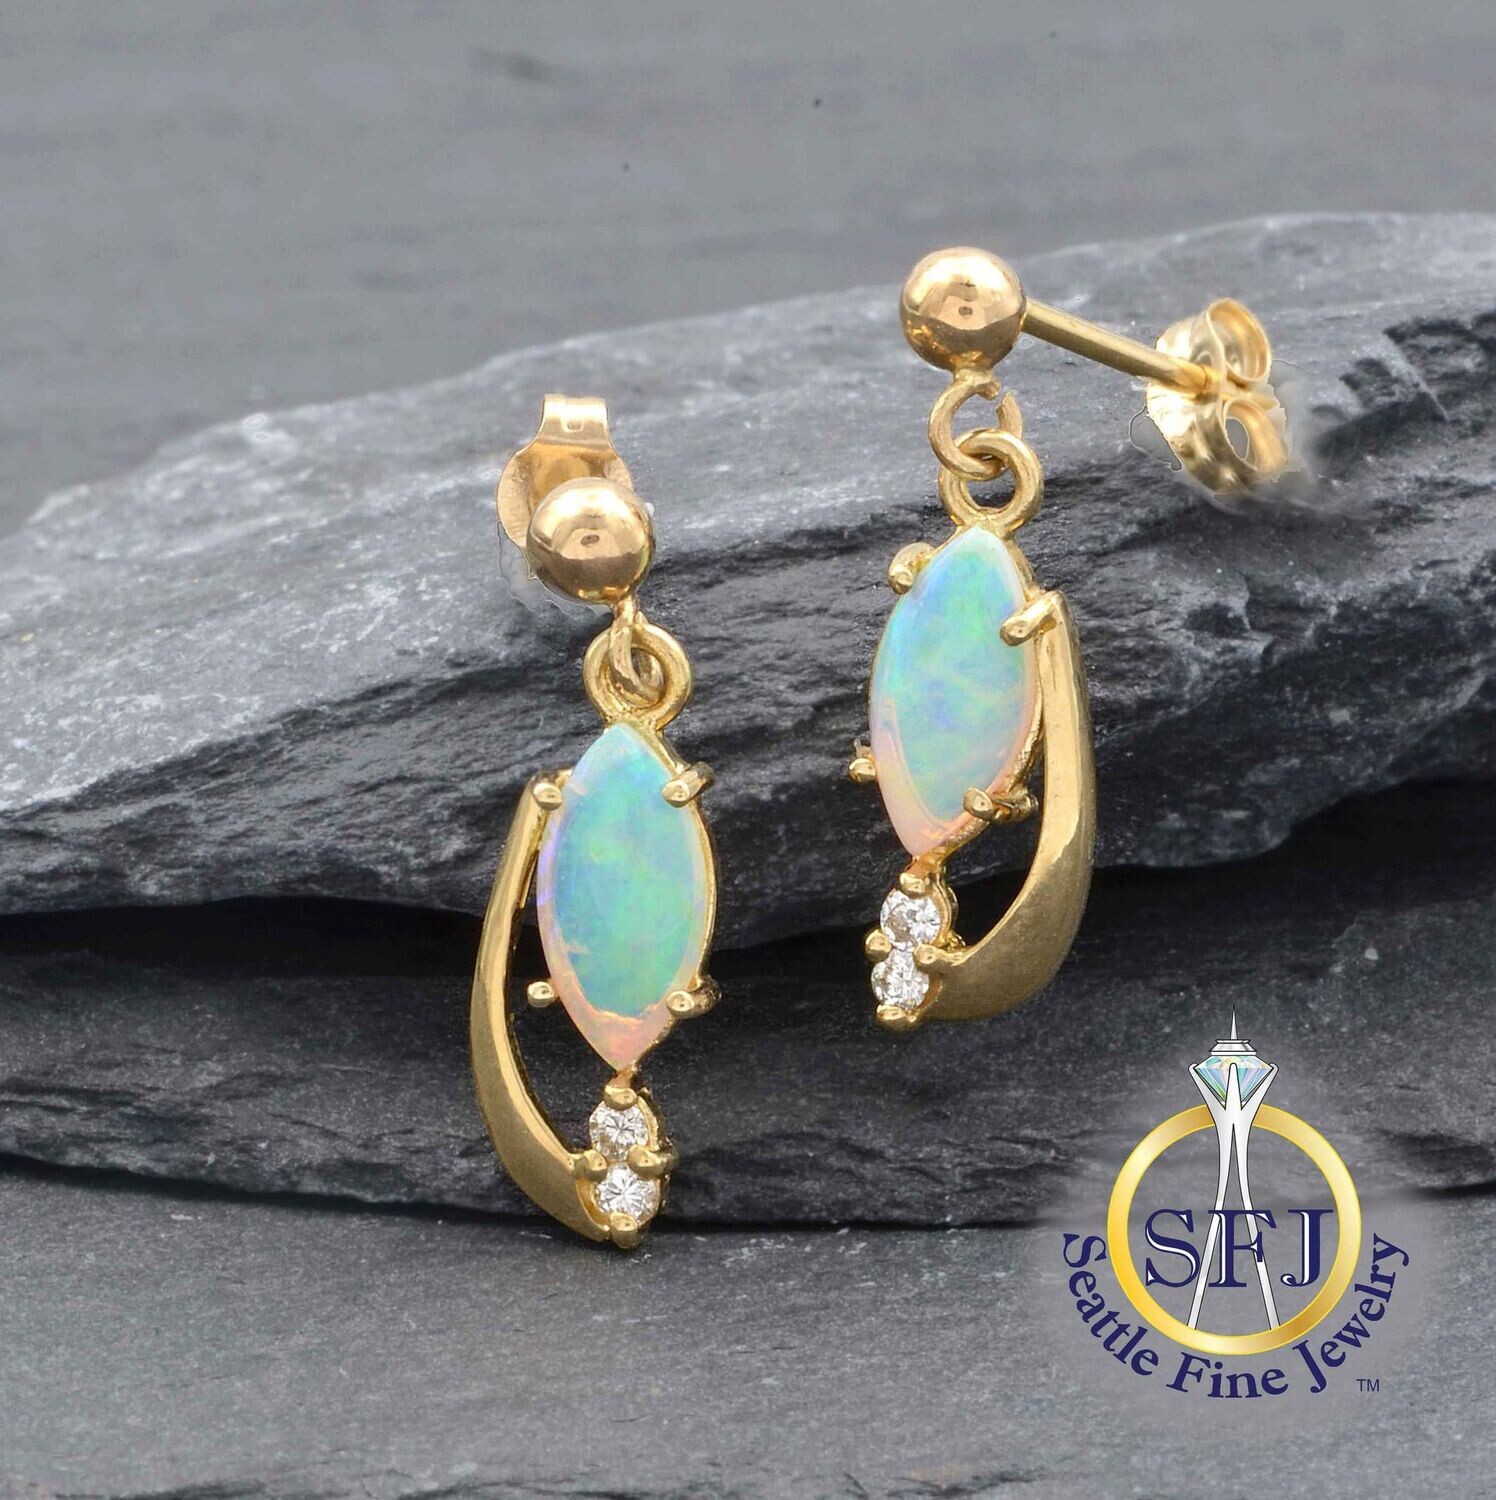 White Opal and Diamond Earrings, Solid 14k Yellow Gold